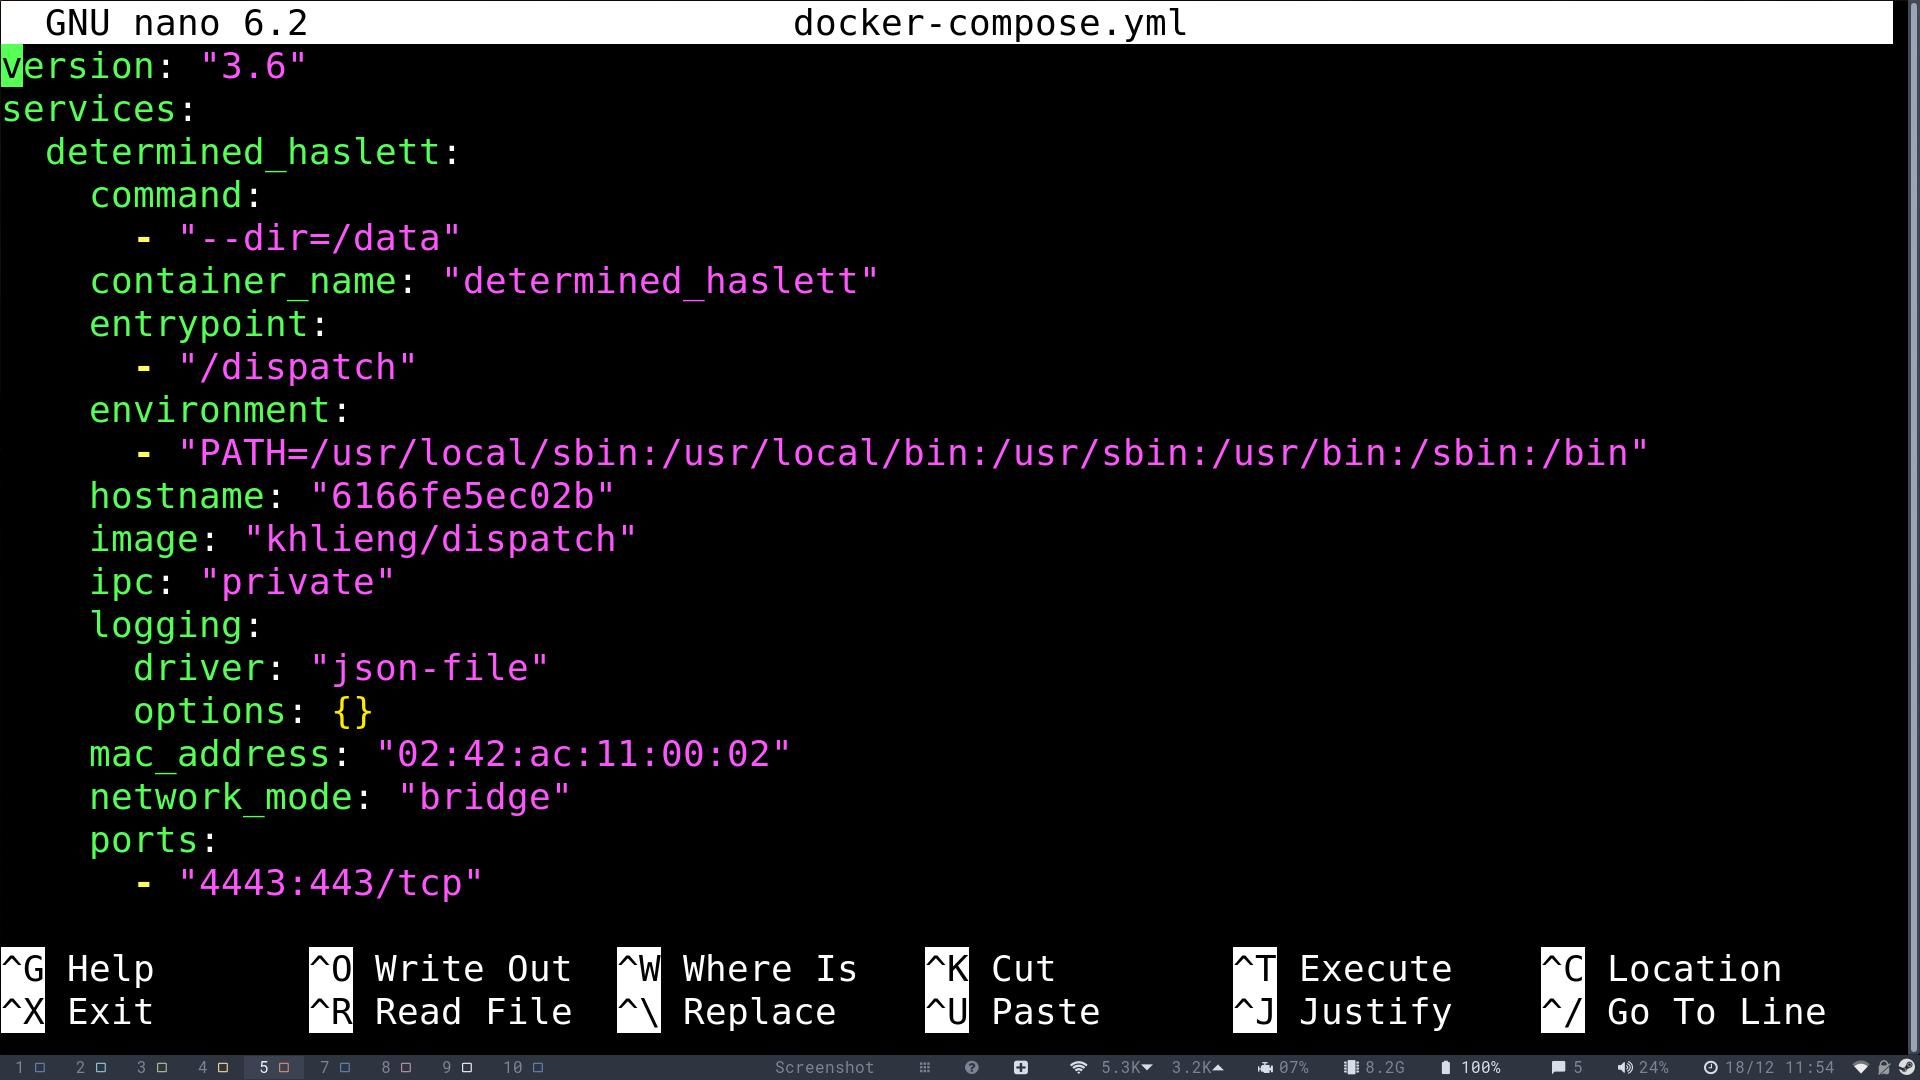 docker-compose generated by docker-autocompose